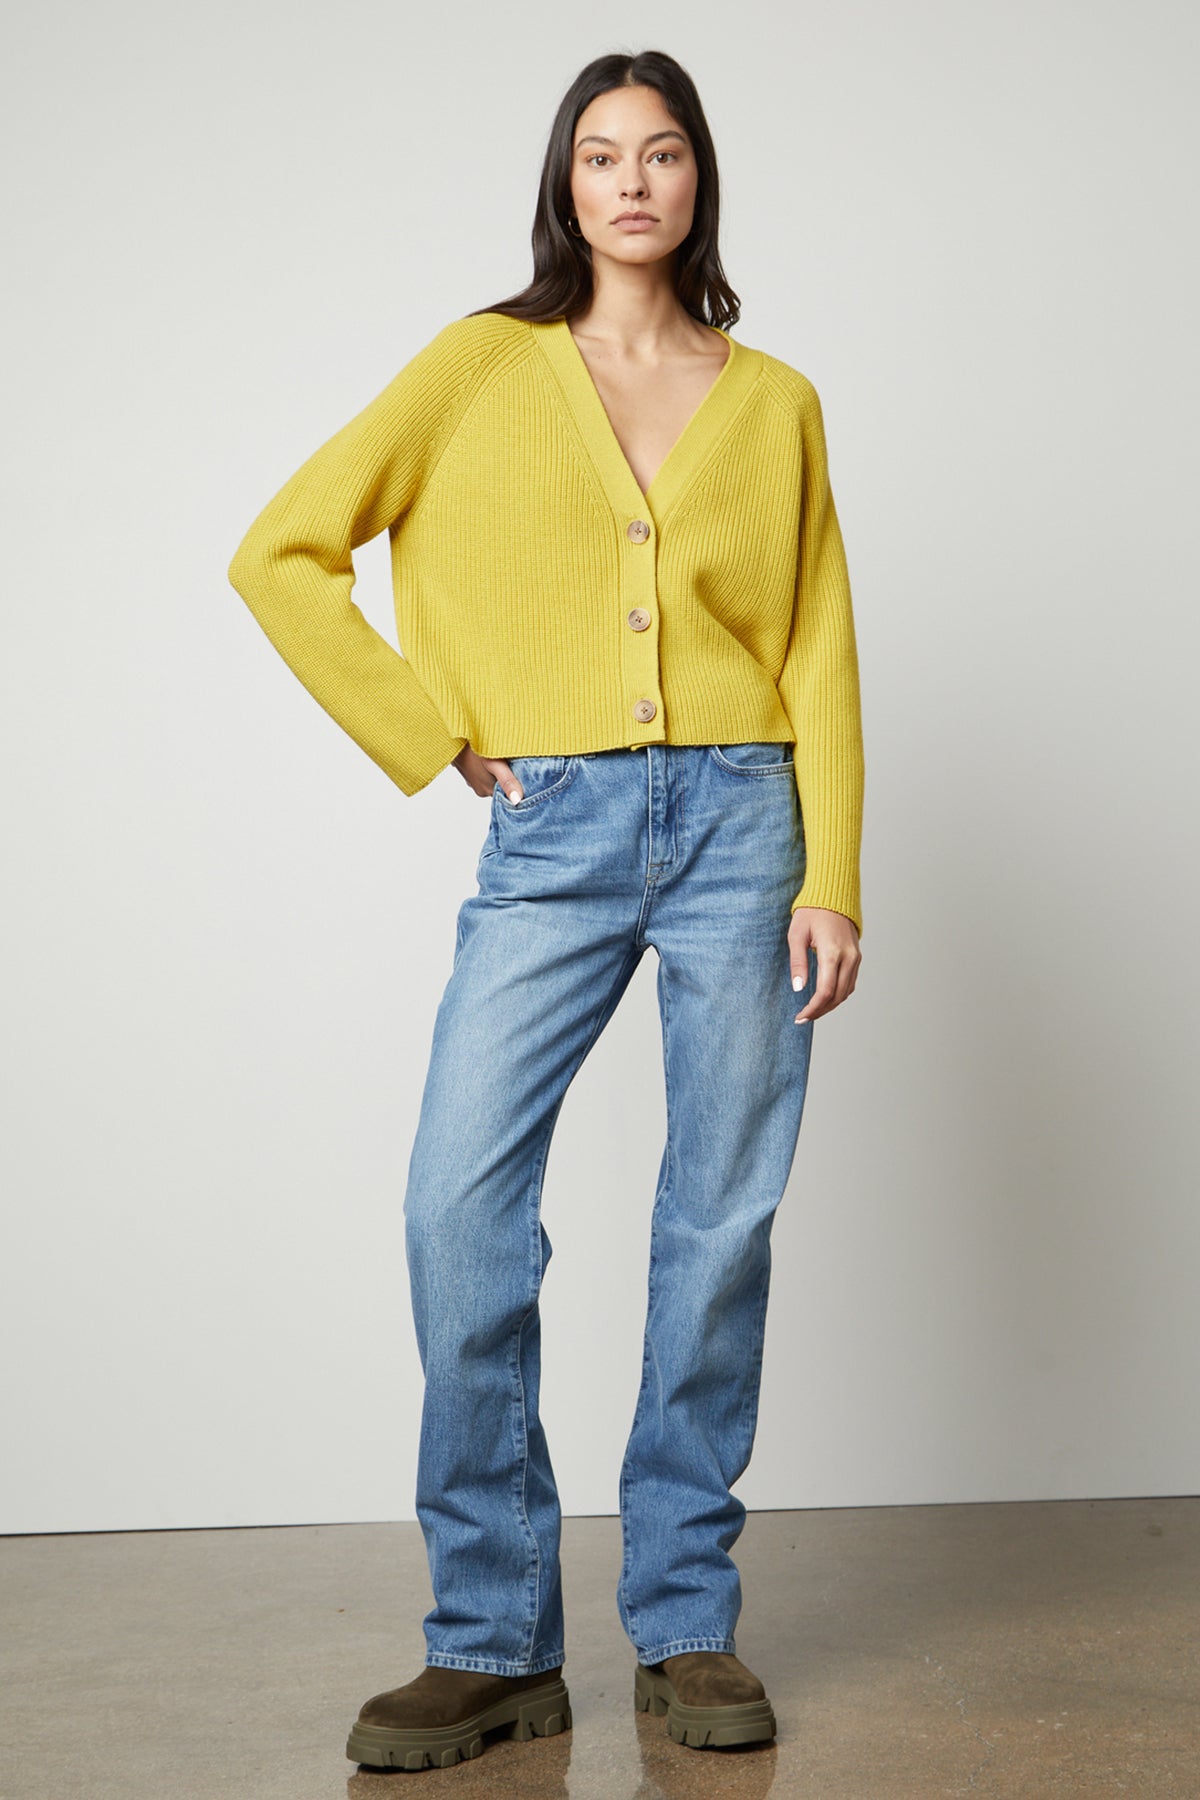   The model is wearing a Yellow MARILYN BUTTON FRONT CARDIGAN by Velvet by Graham & Spencer and jeans. 